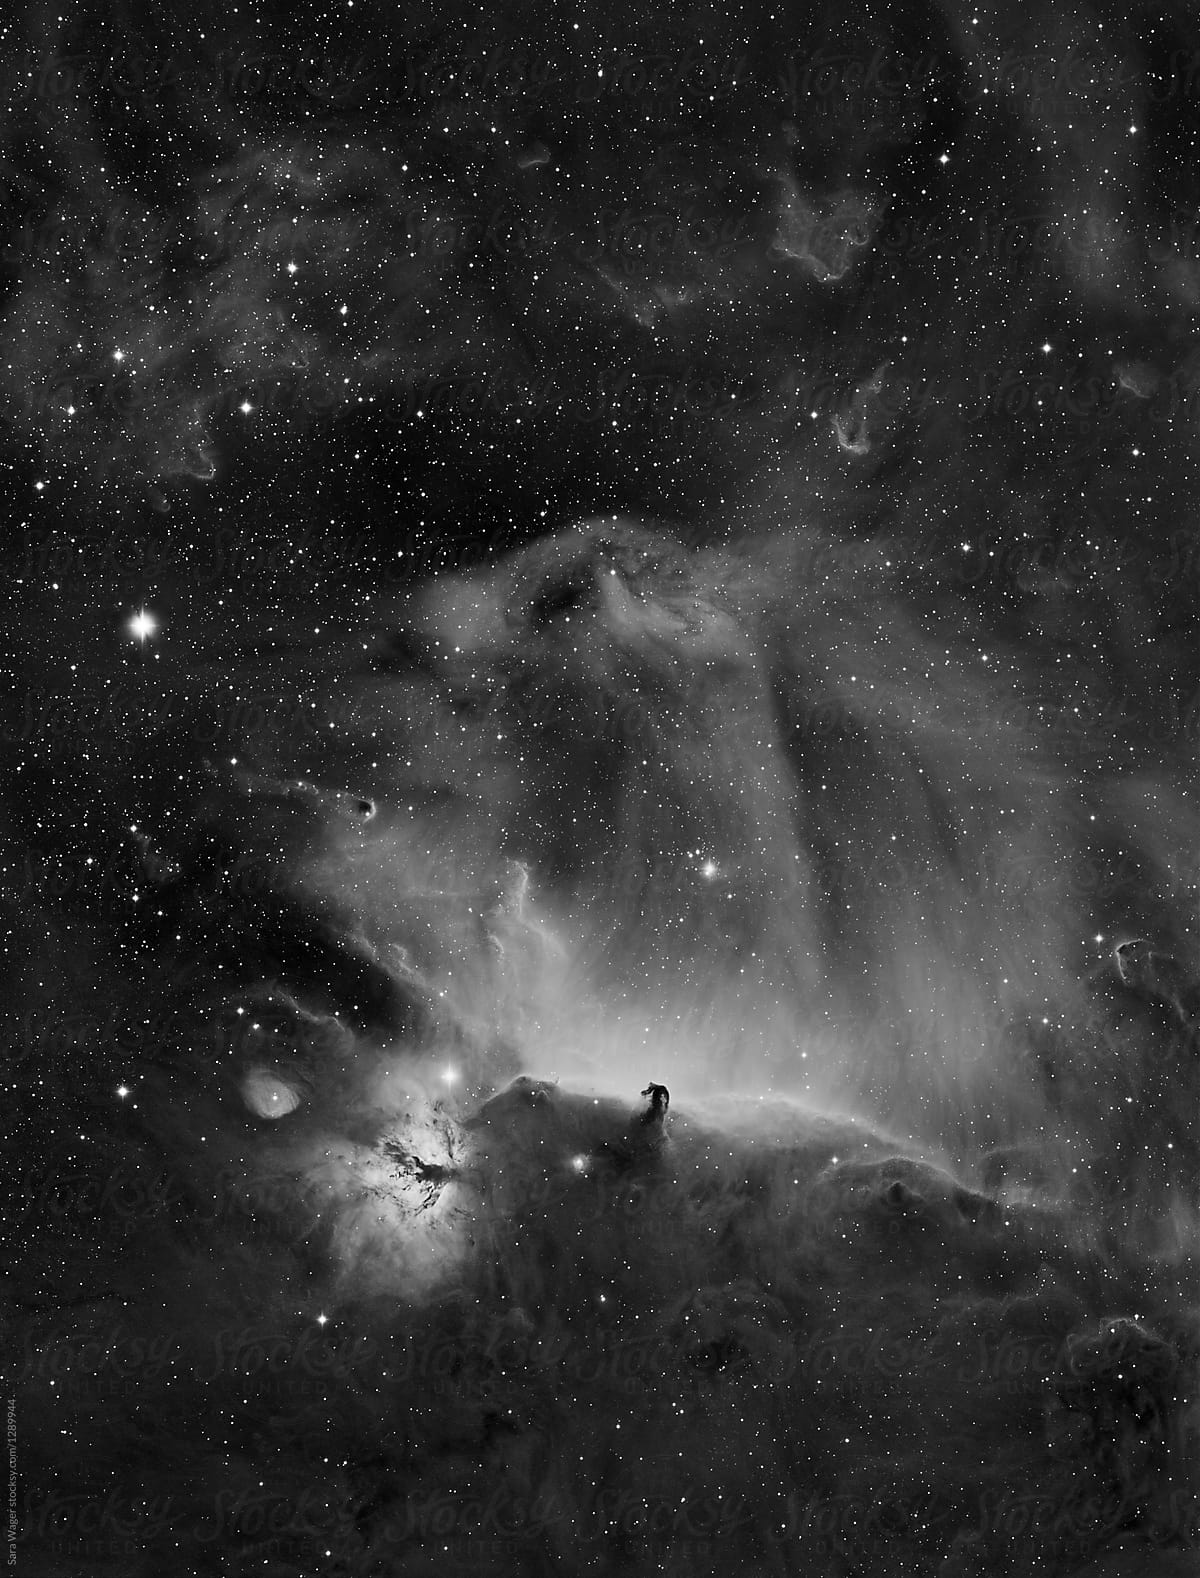 A widefield image of the Horsehead and flame nebula in mono